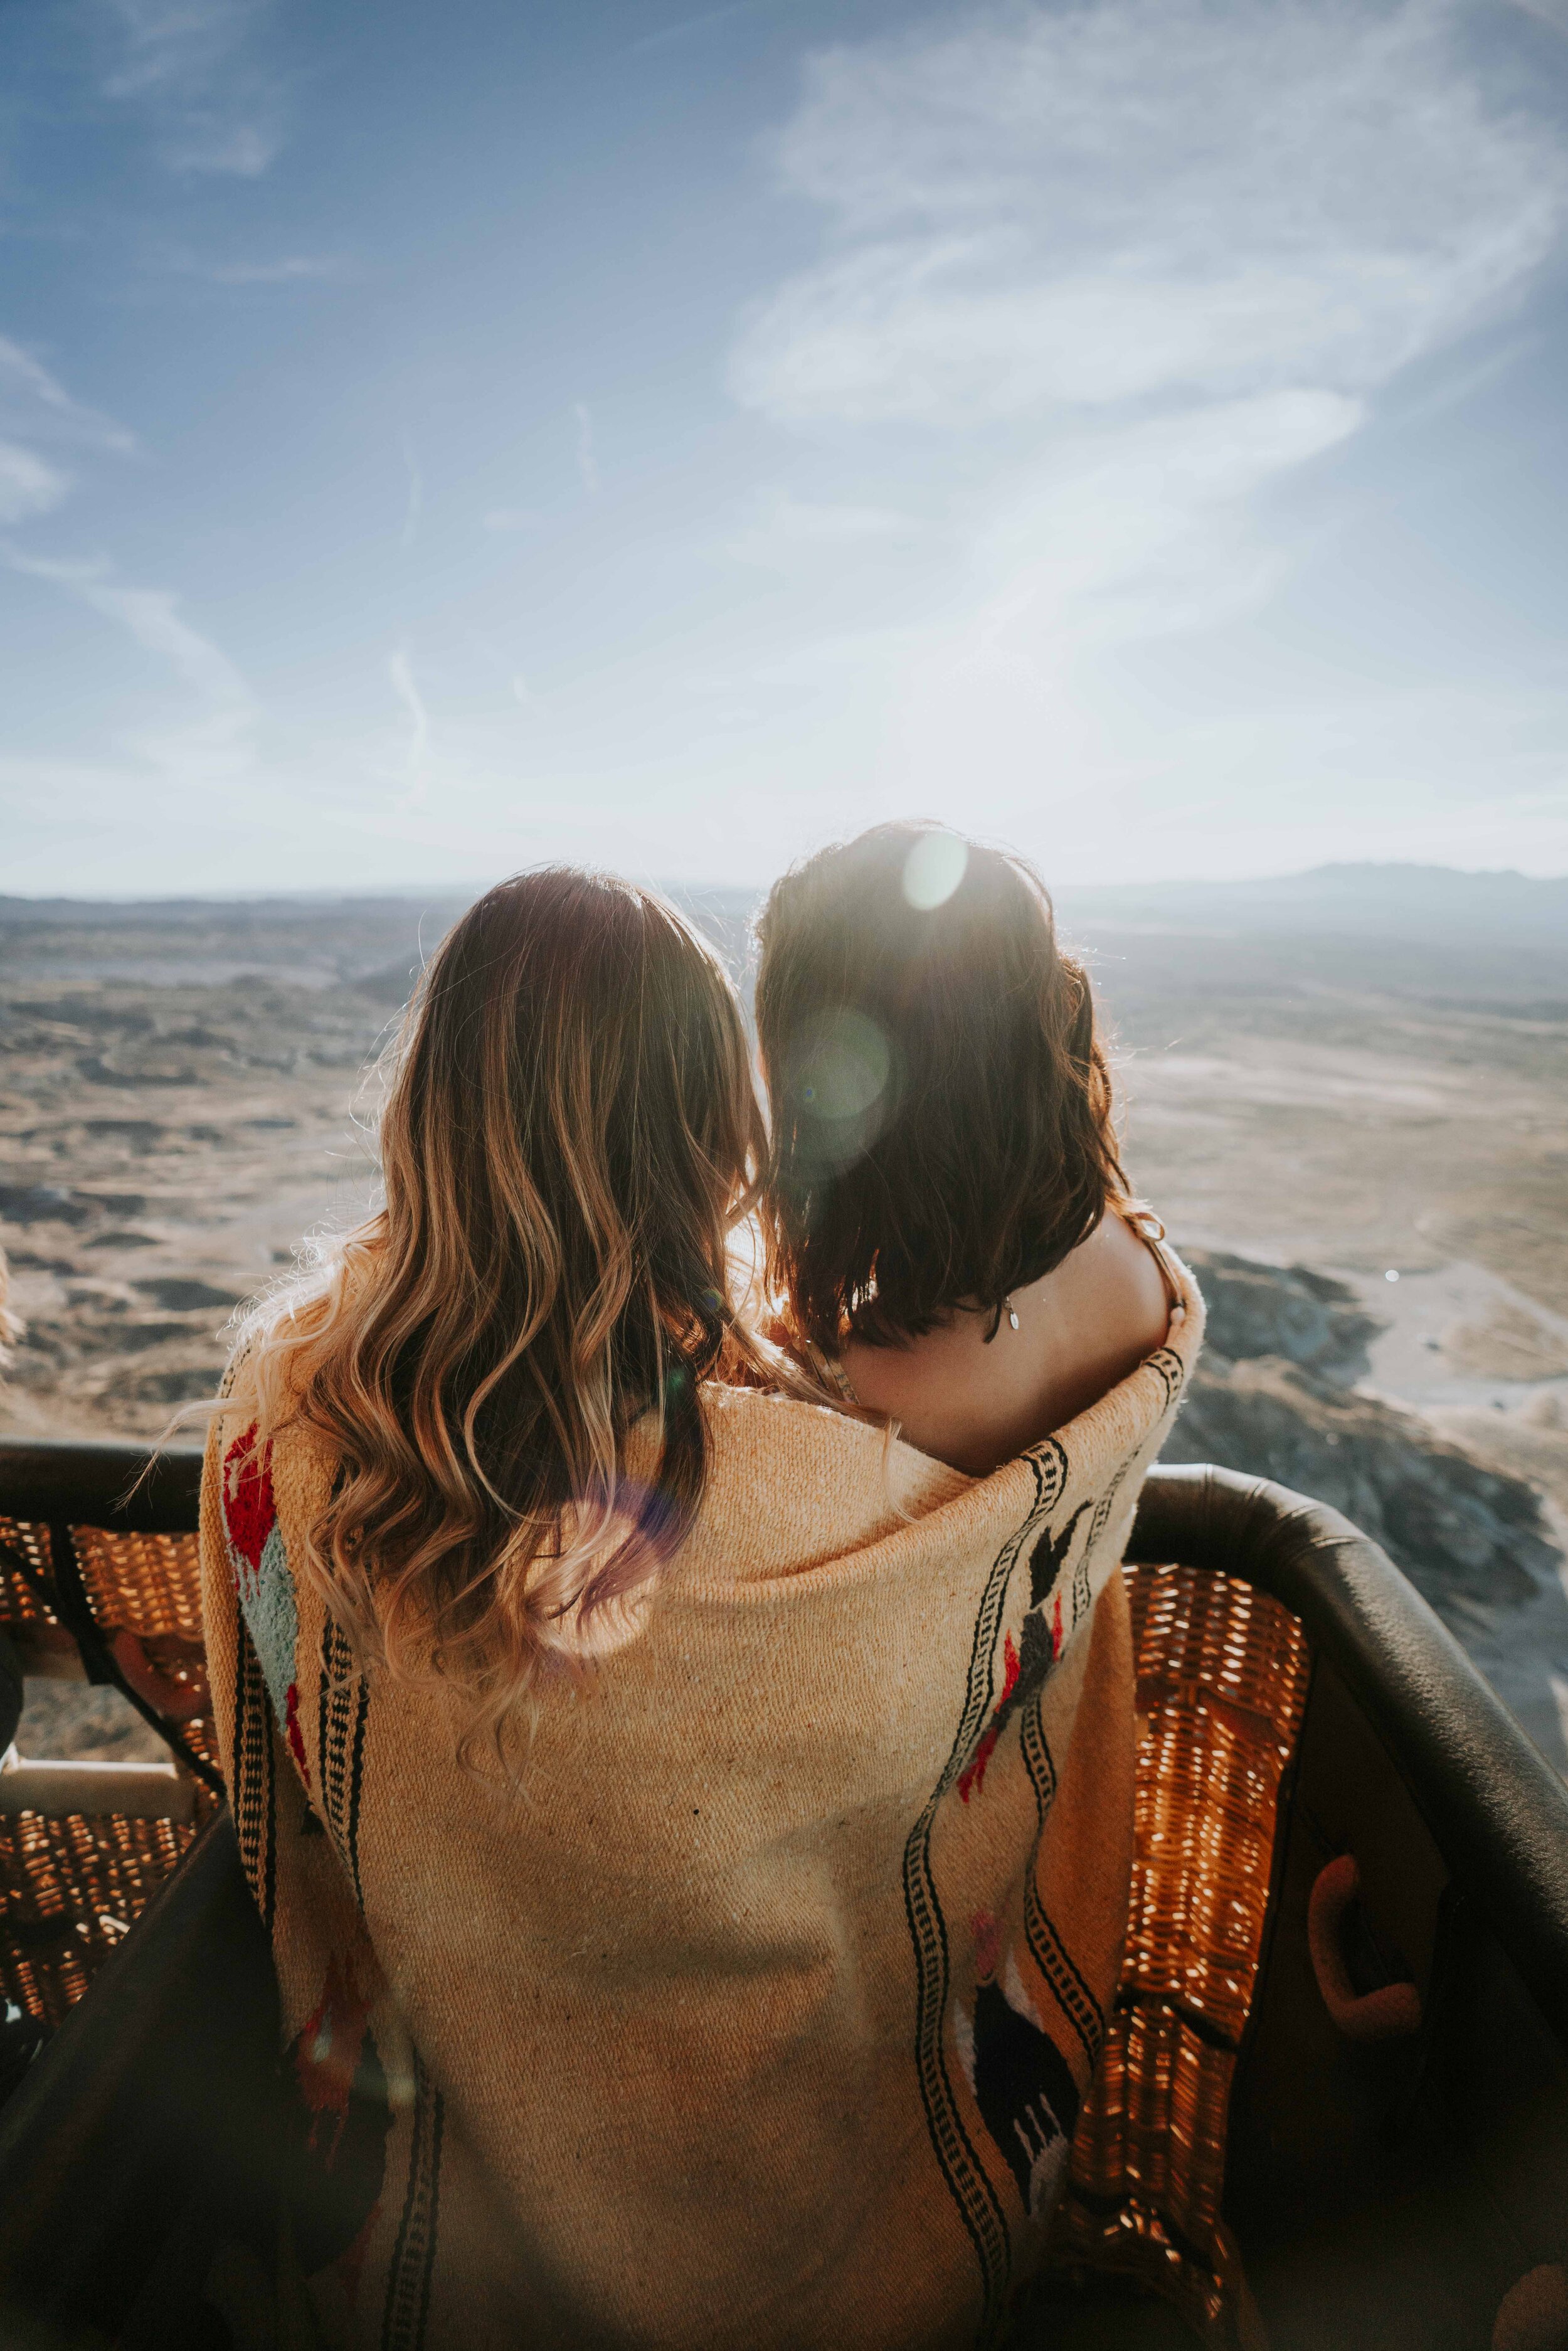  Hot air balloon ride over Moab, Utah. Get the perfect 7 day Utah road trip itnerary and Utah road trip map of all the best places to see in Utah. #utah #roadtrip #southwest | things to do in Utah road trip | things to do in Moab Utah | Utah road tri